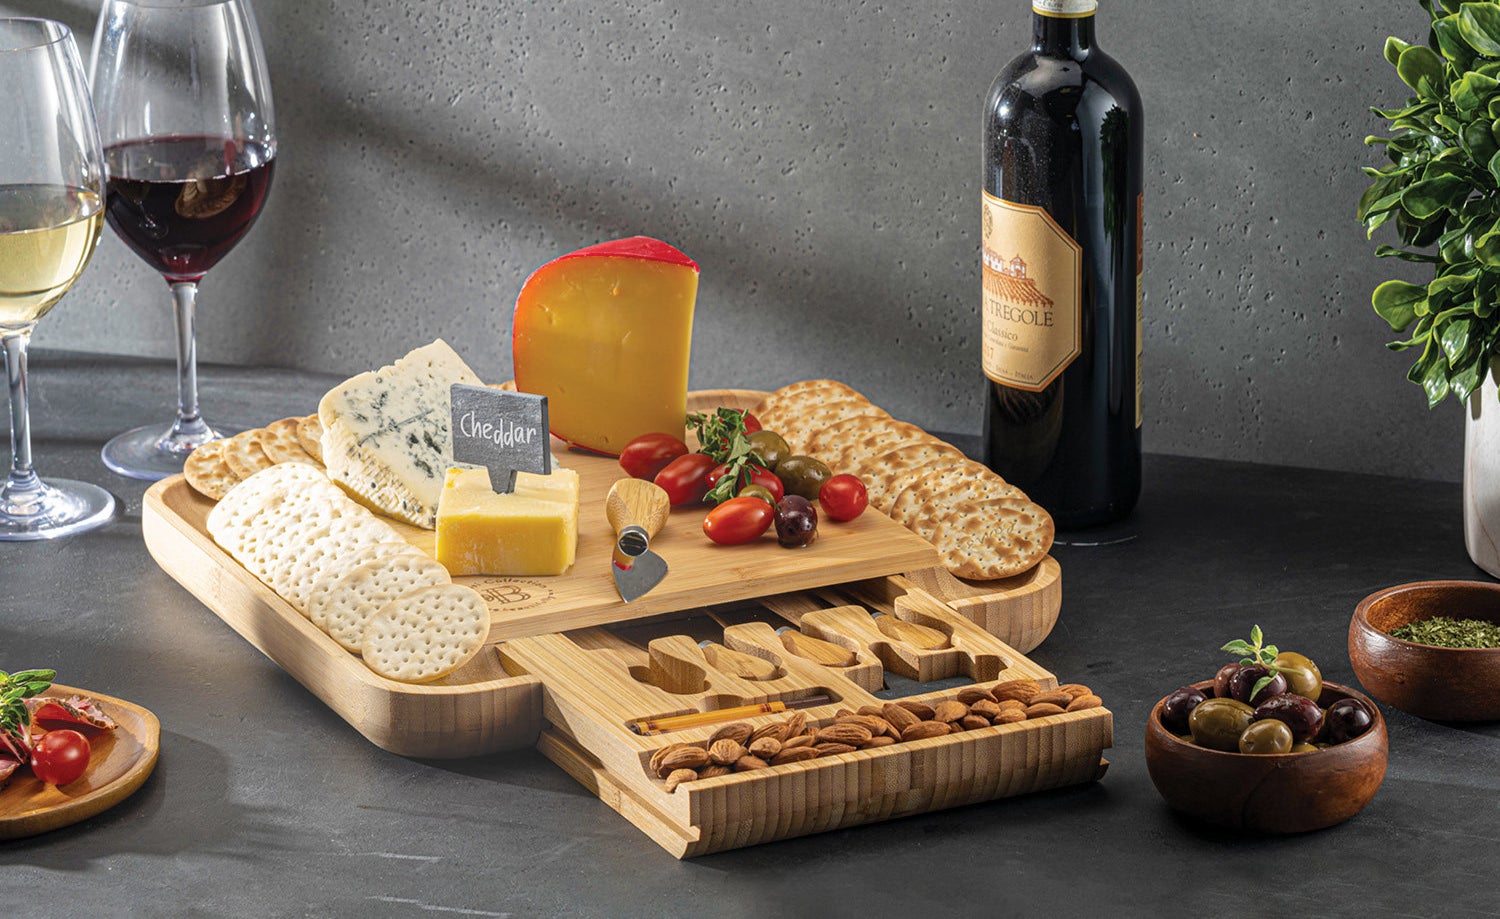 the cheeseboard with cheese, fruits, and crackers on it and wine next to it